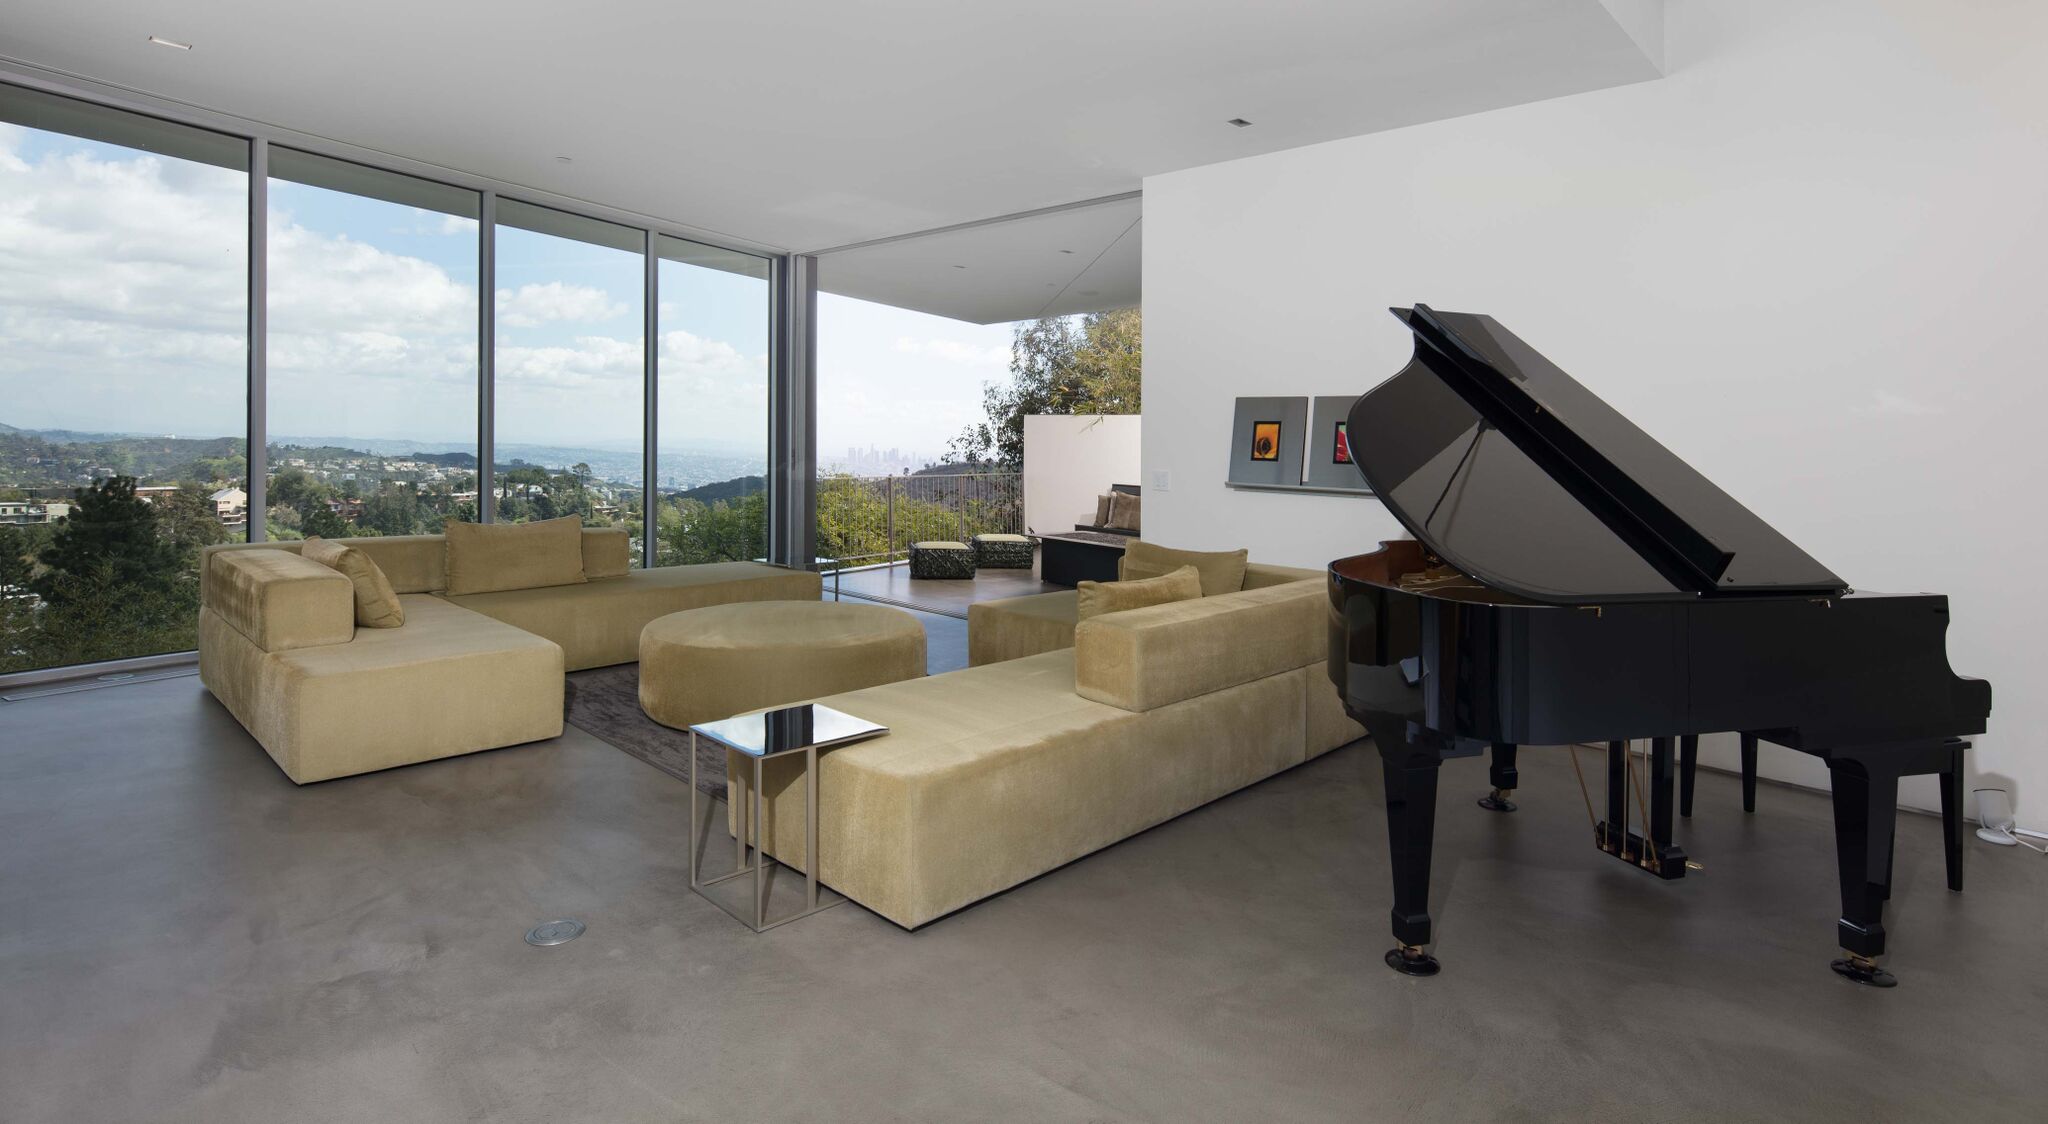 Beverly Hills Home Featured in ‘Starboy’ Music Video Is Asking $6.4M